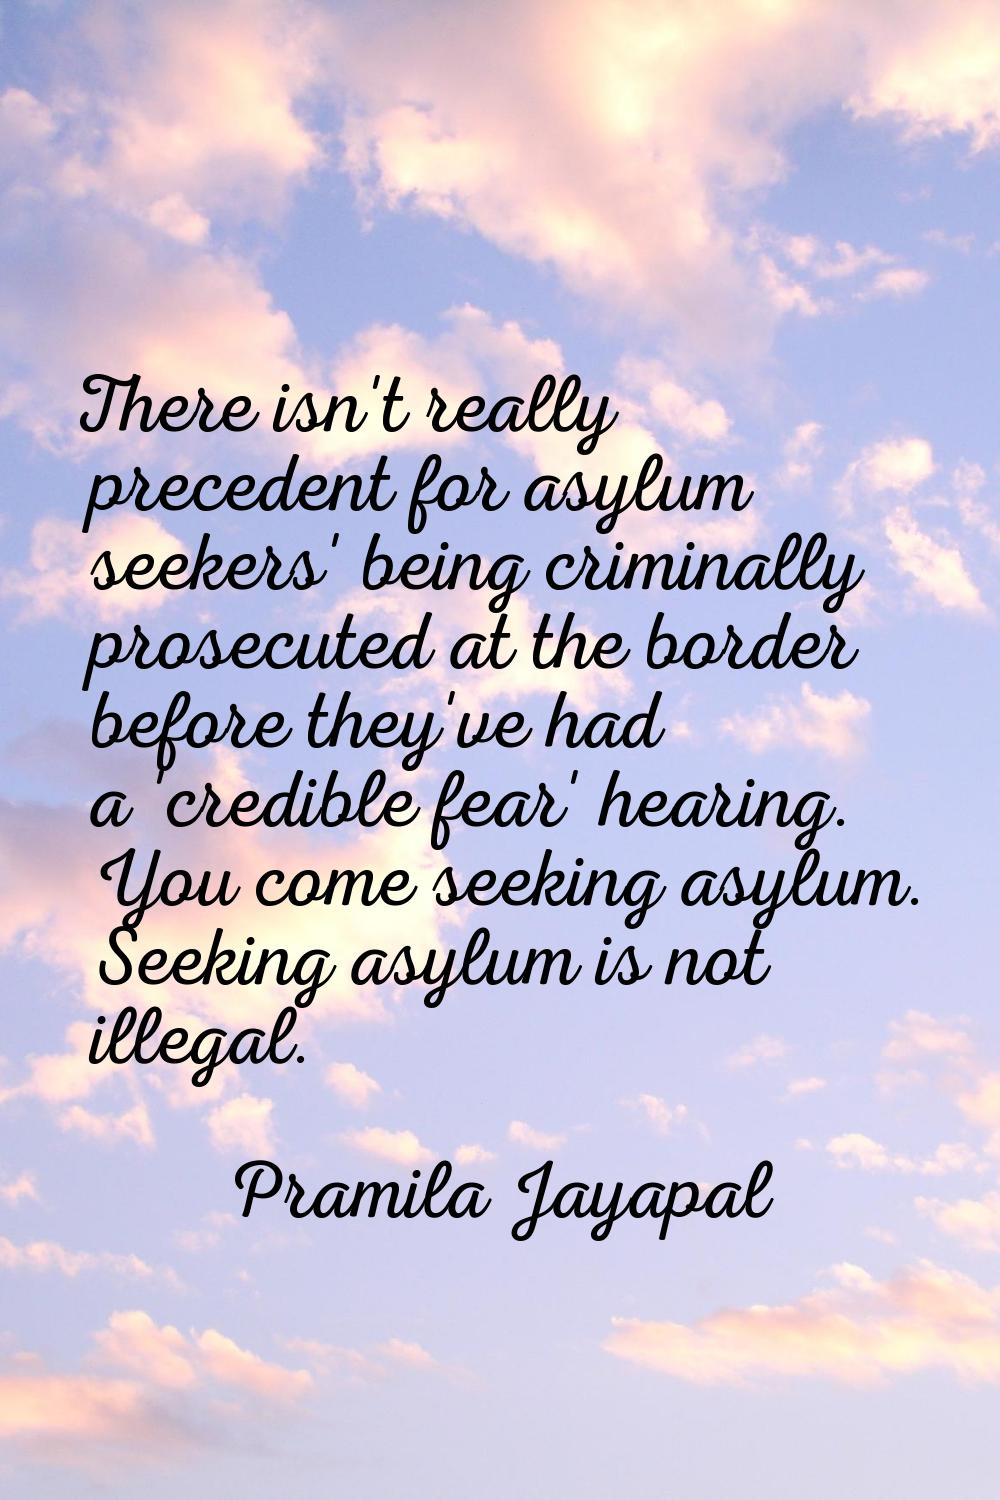 There isn't really precedent for asylum seekers' being criminally prosecuted at the border before t